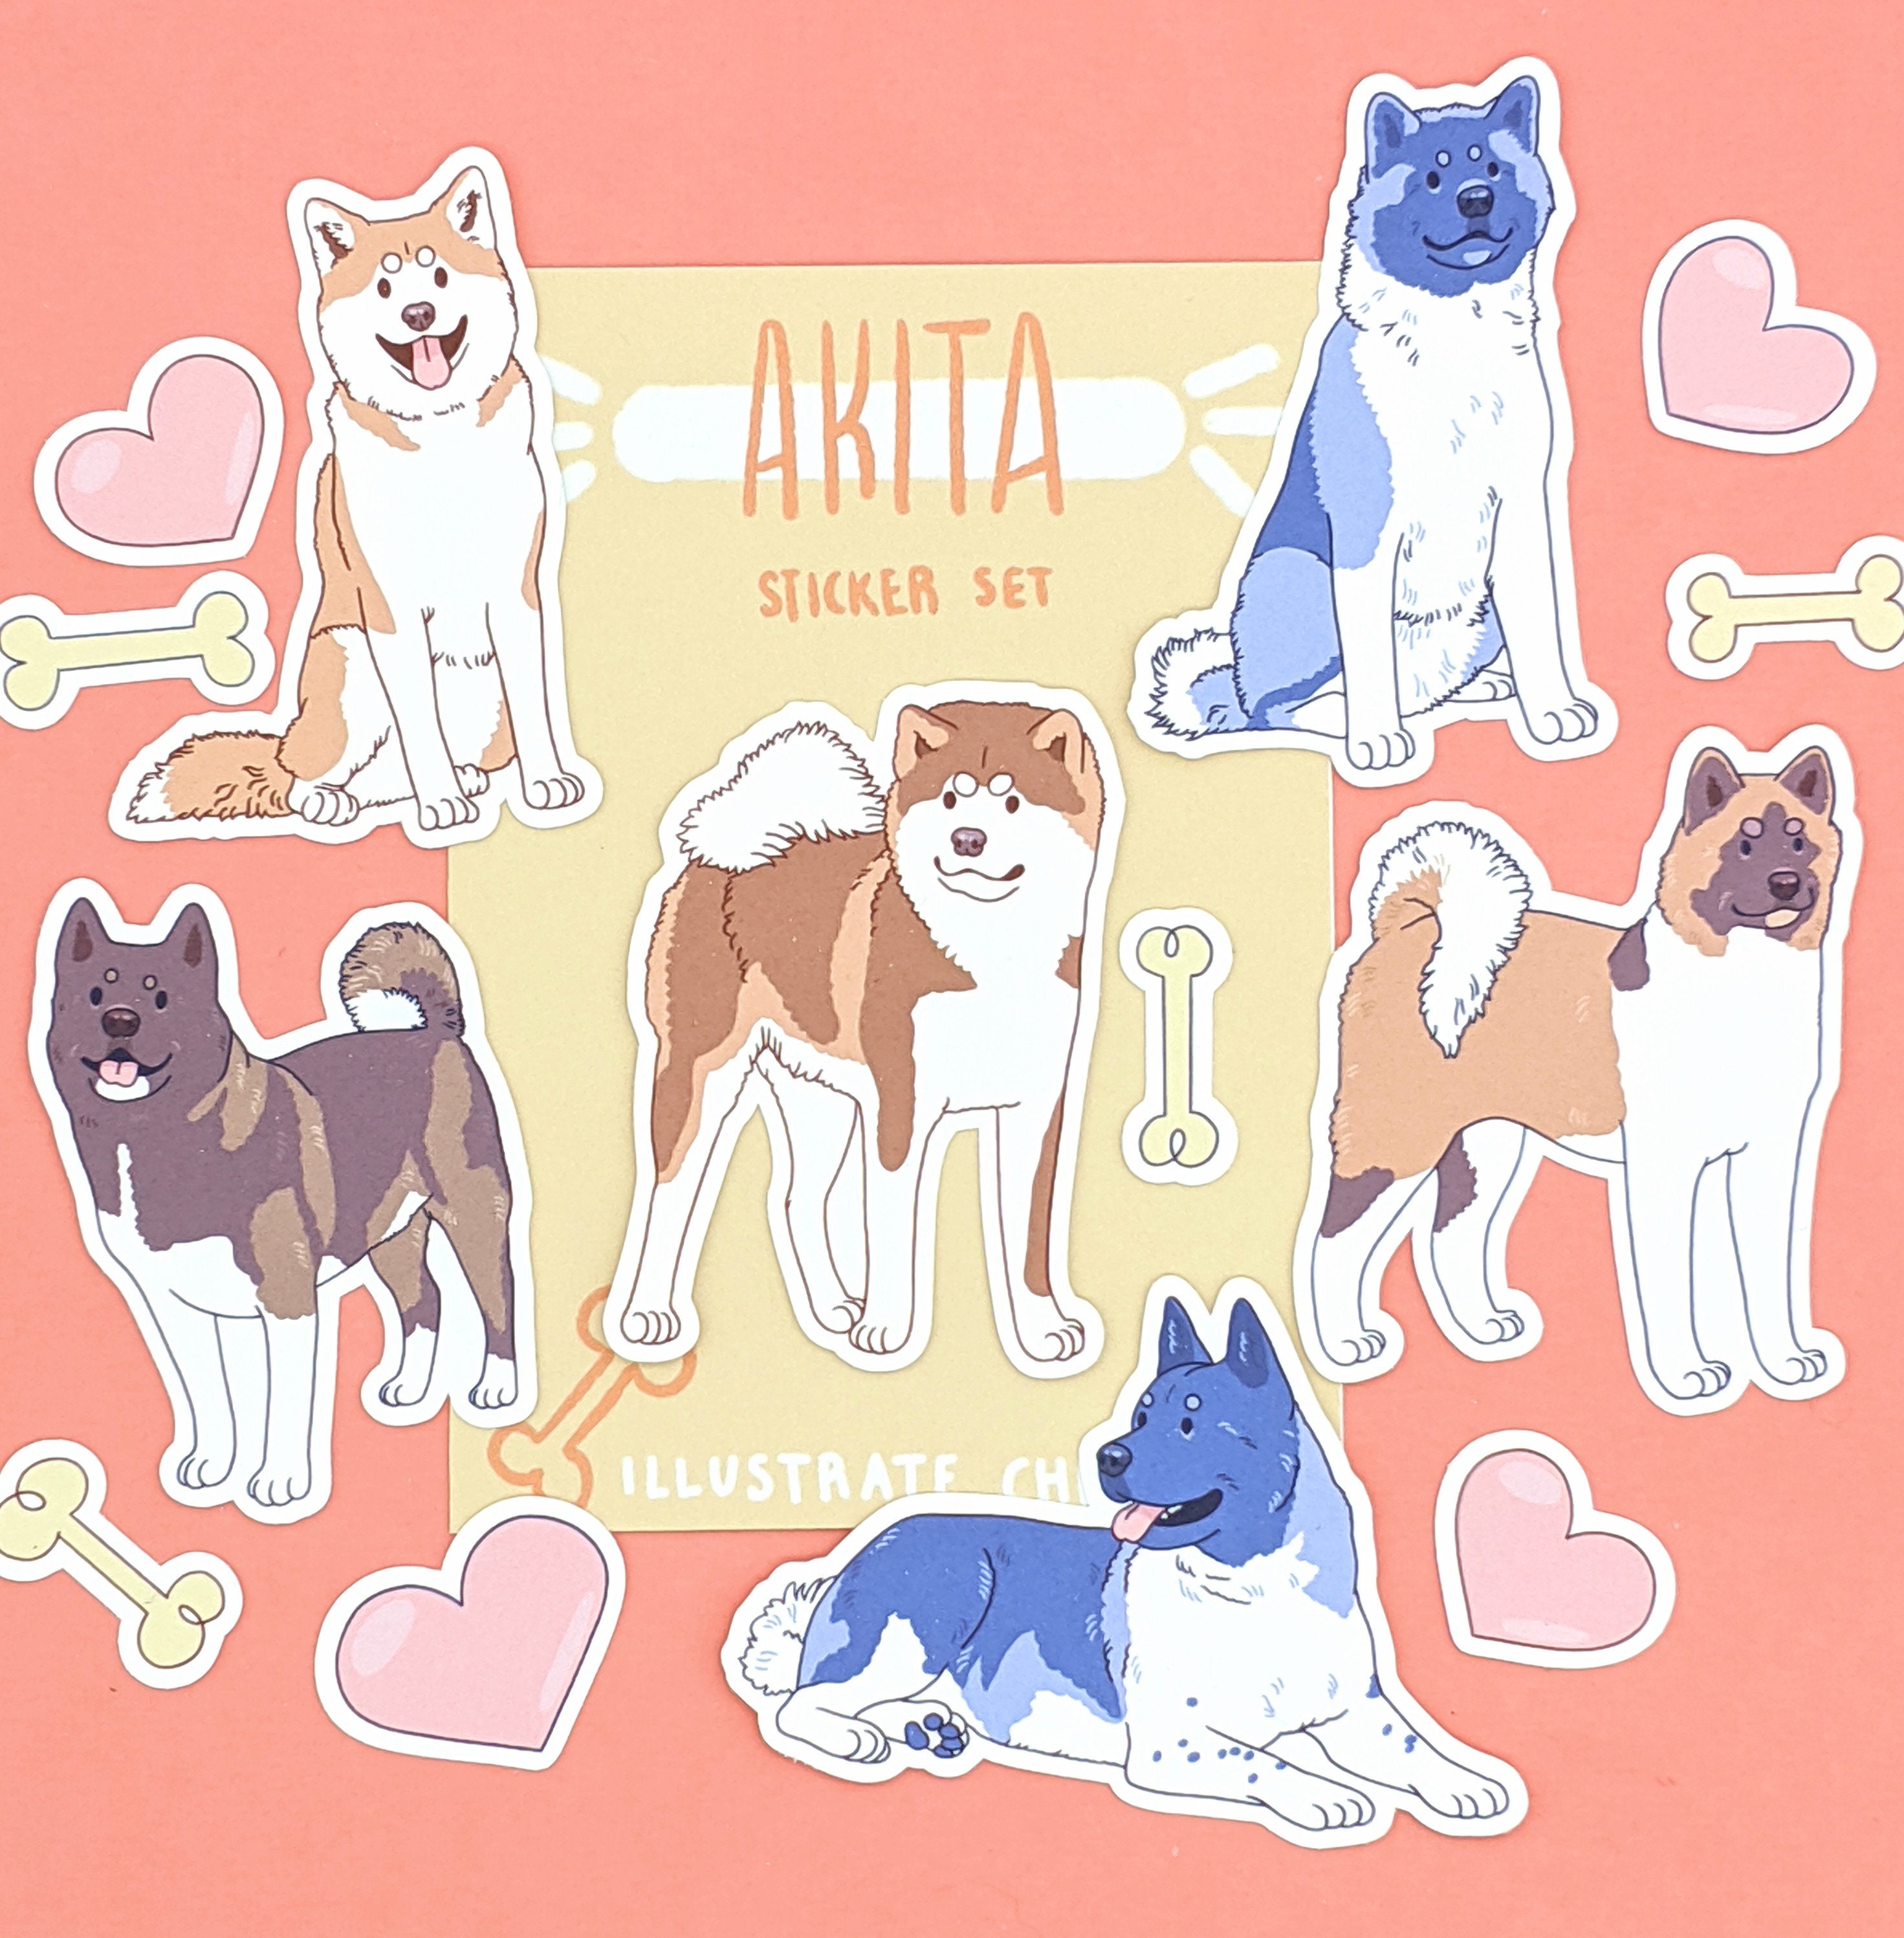 American Akita Sticker, Cute Puppy Dog Gift, Pet Stickers for Laptop, Fun Dog  Stickers for Kids, Waterproof Doggie Stickers 